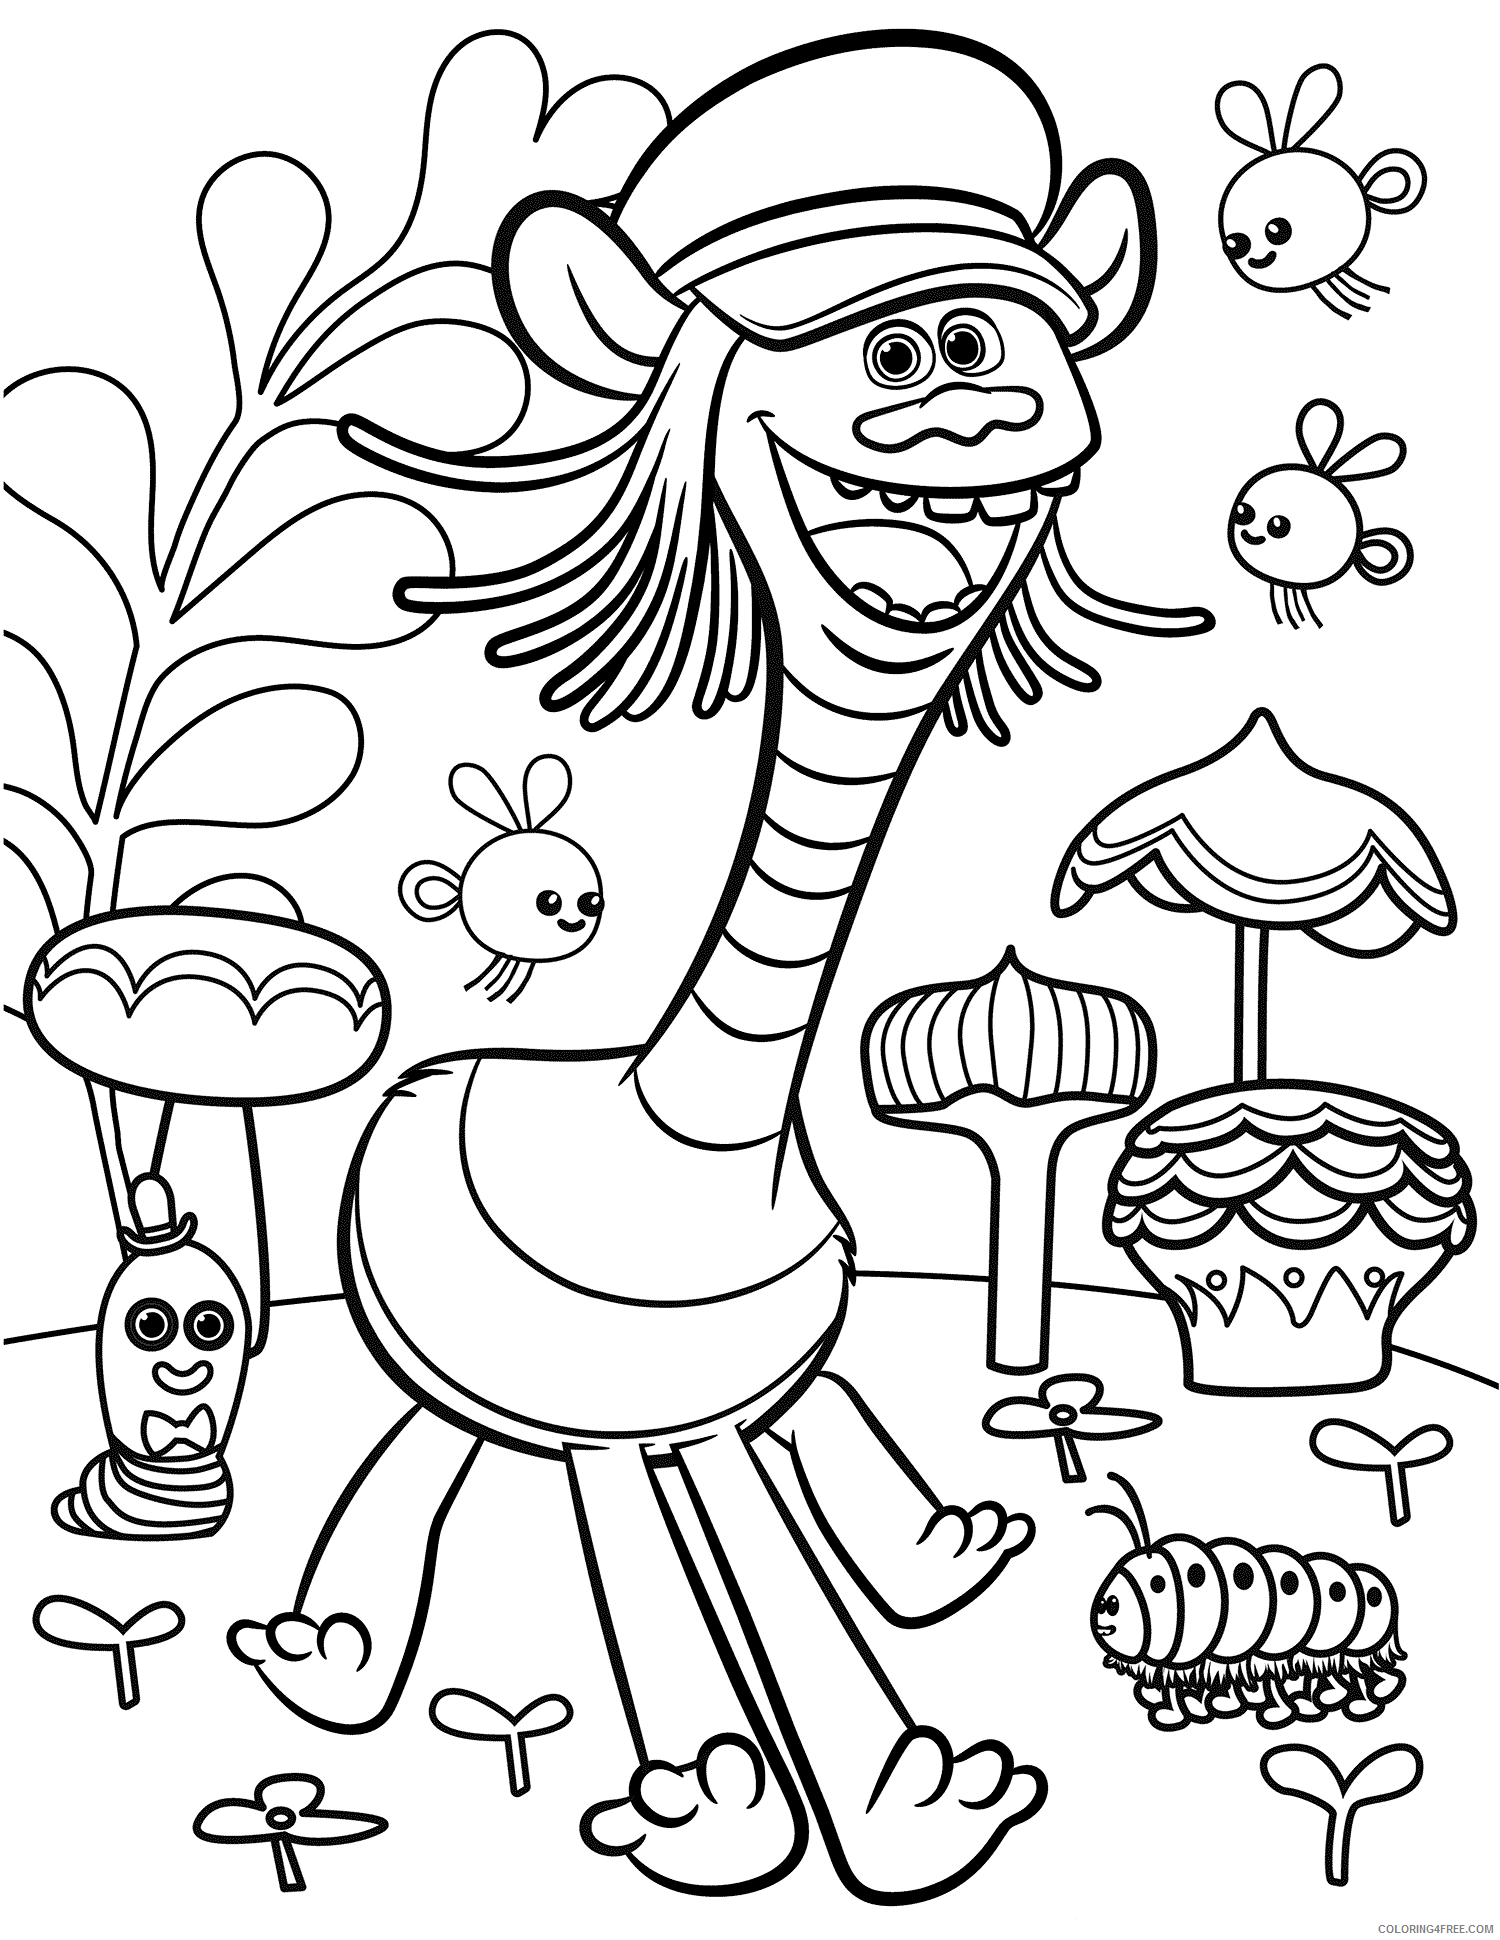 Trolls Coloring Pages TV Film Trolls Movie Printable 2020 10854 Coloring4free